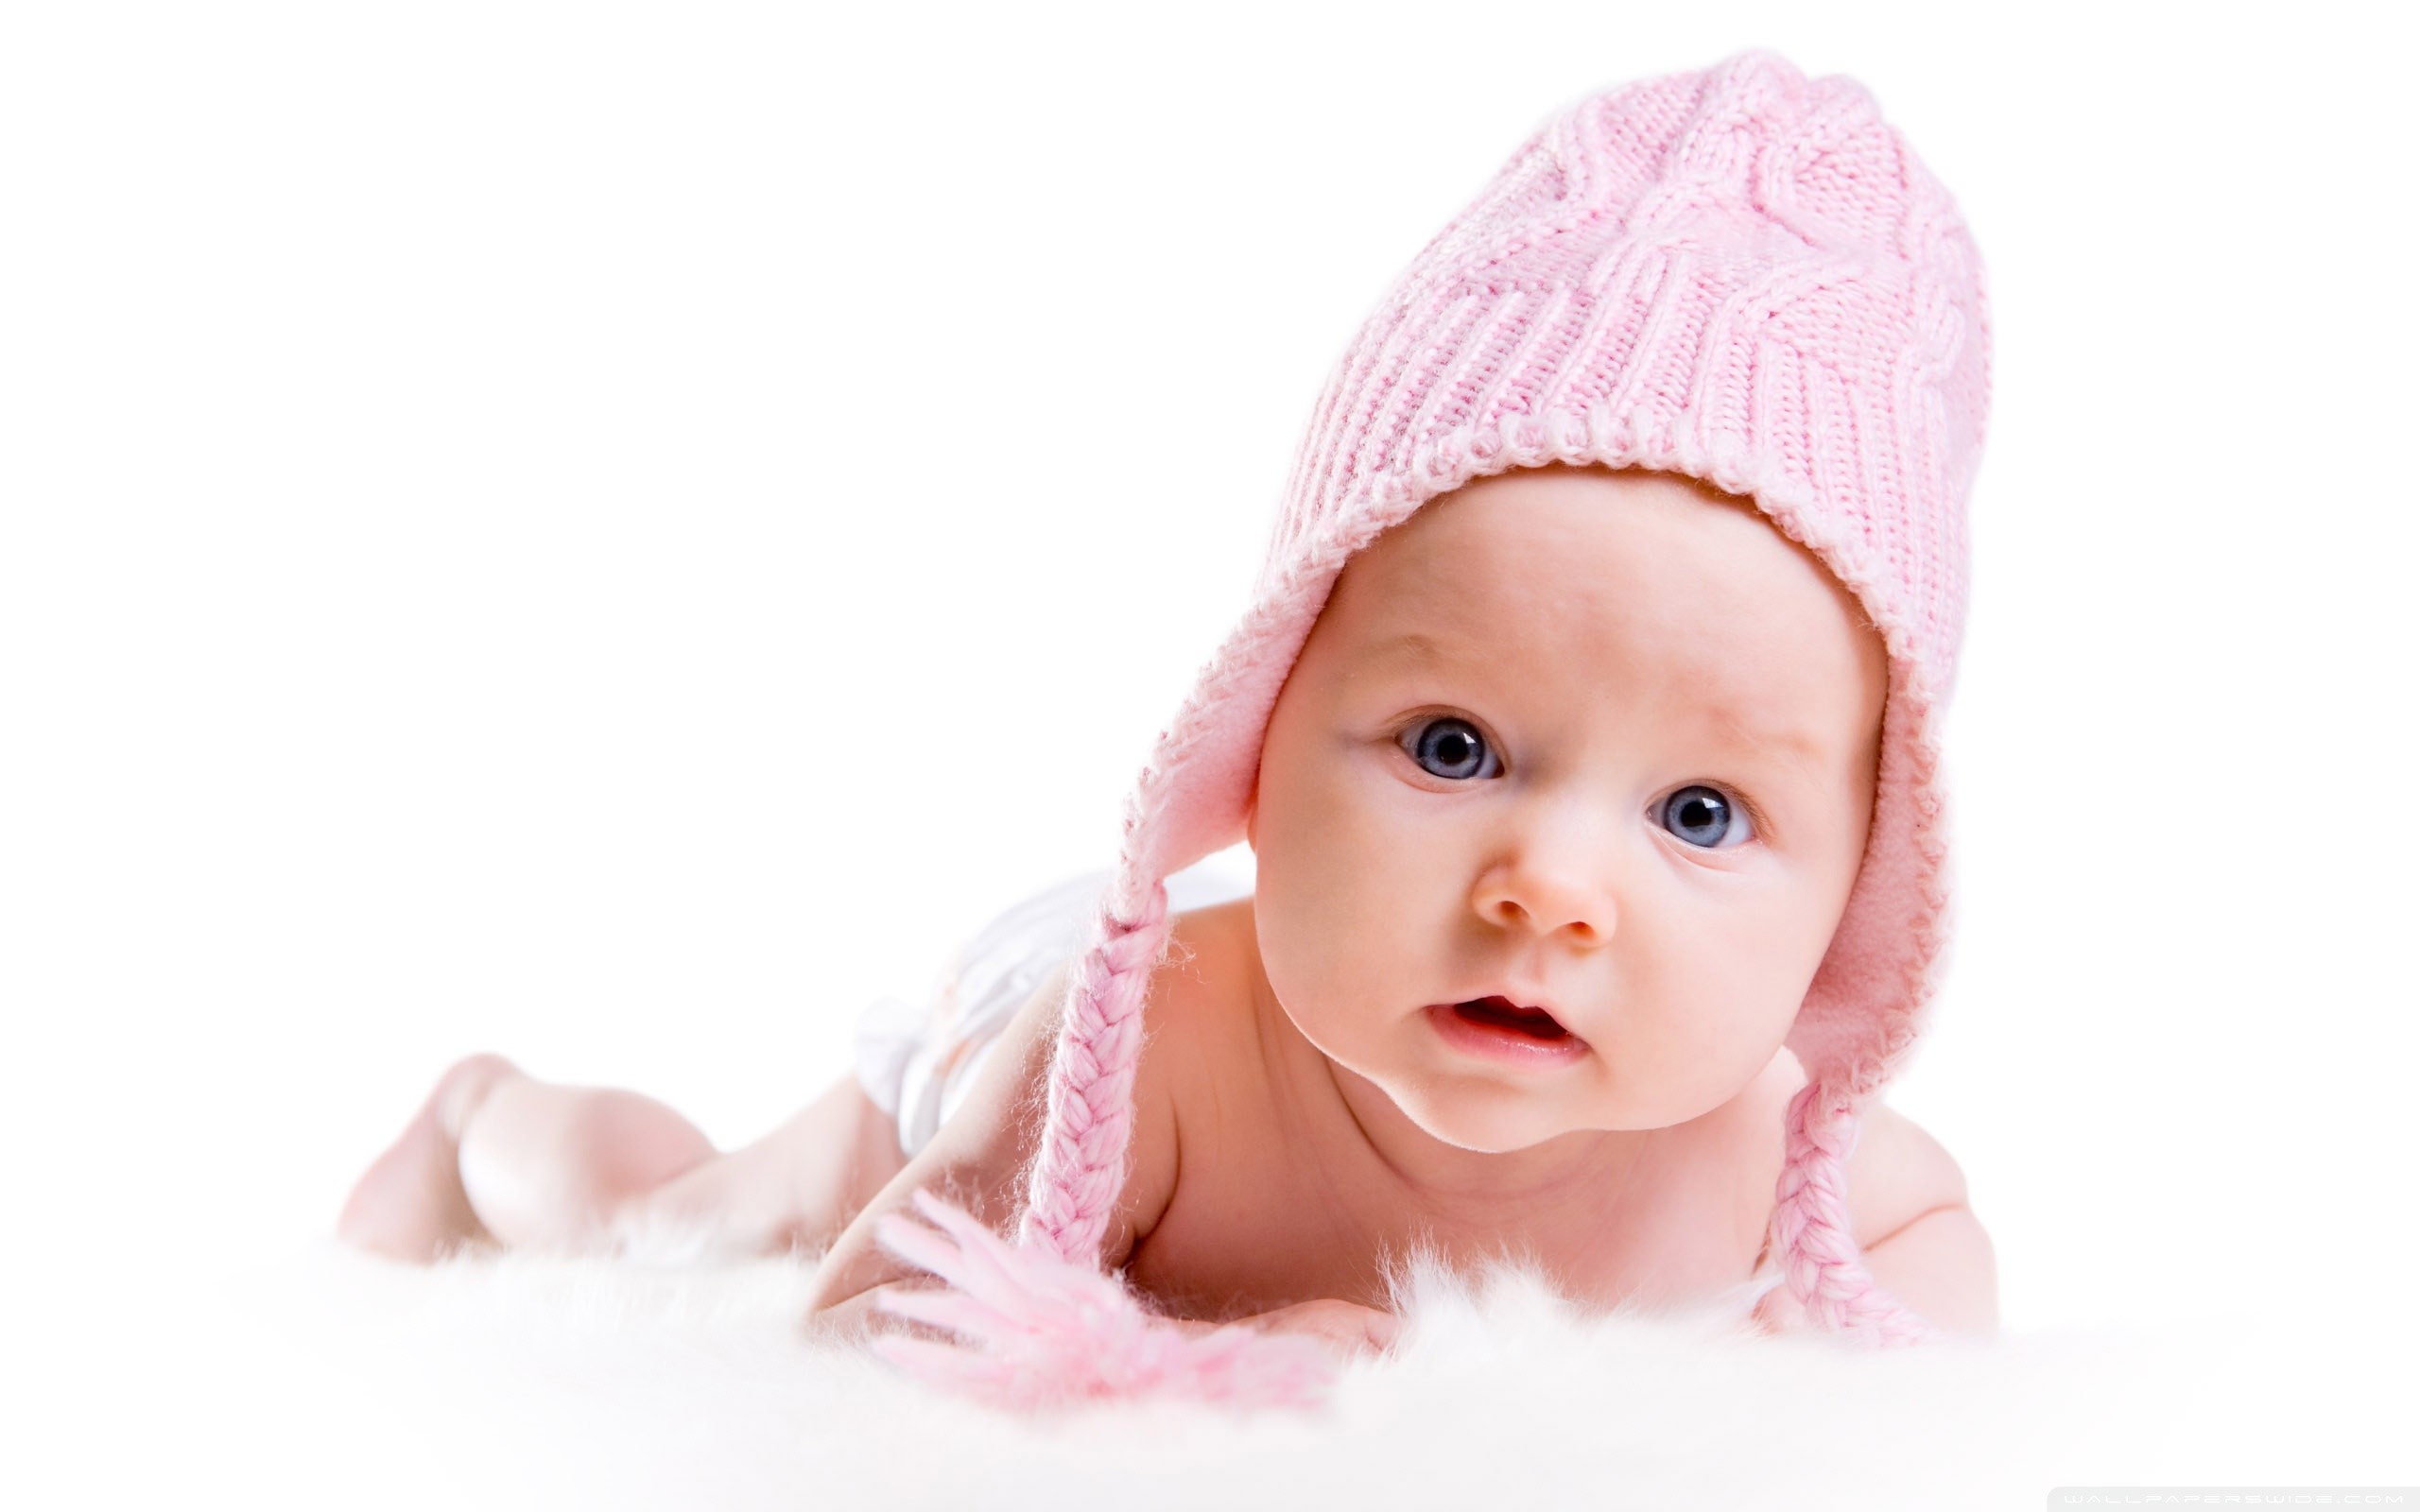 200+] Baby Girl Pictures | Wallpapers.com